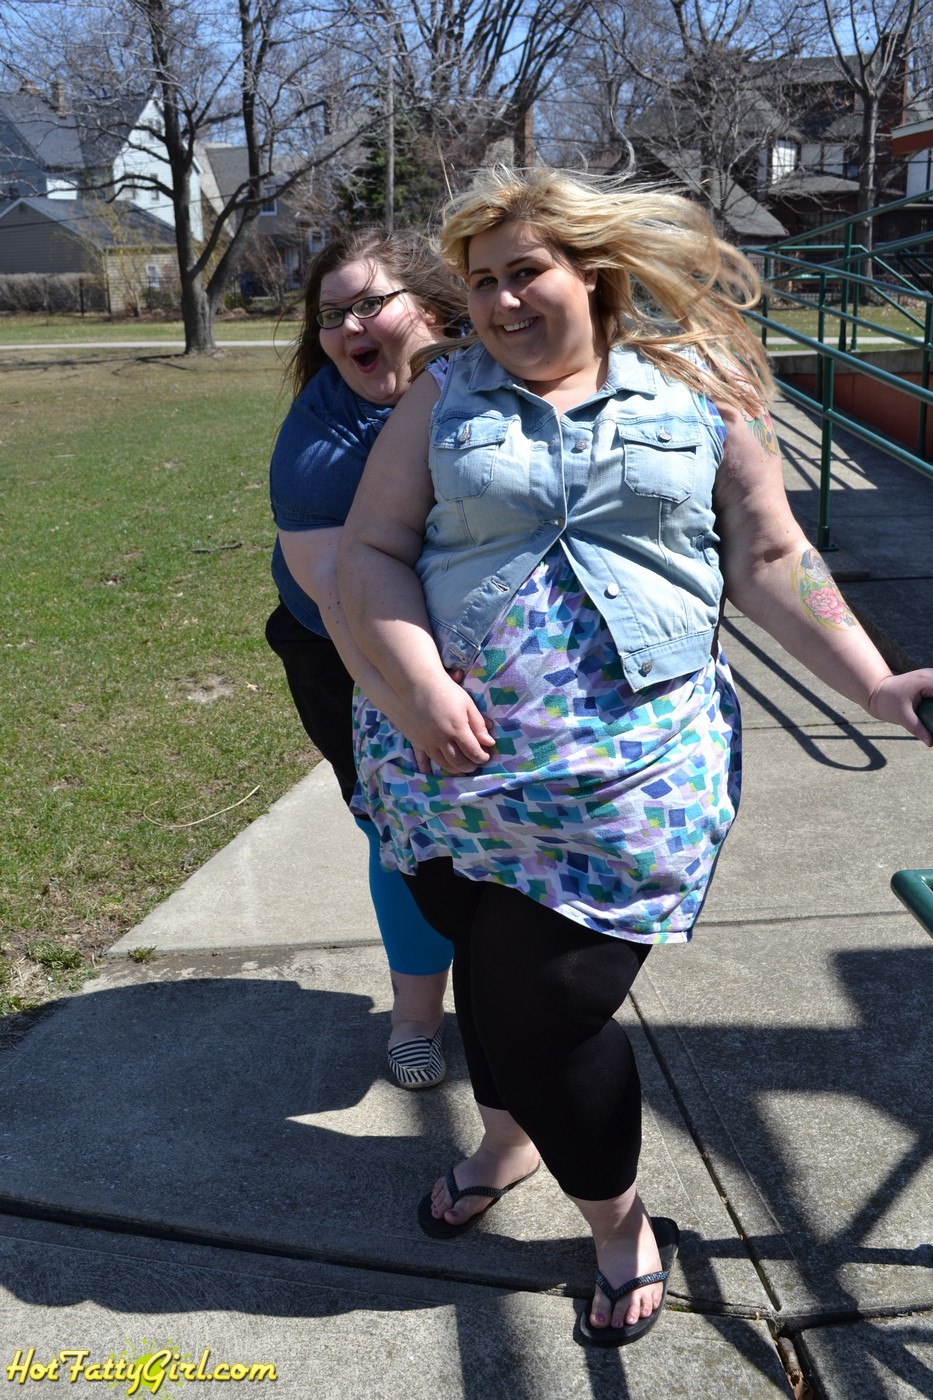 hotfattygirl:  From a recent HotFattyGirl.com update with my BFF Violet James! This